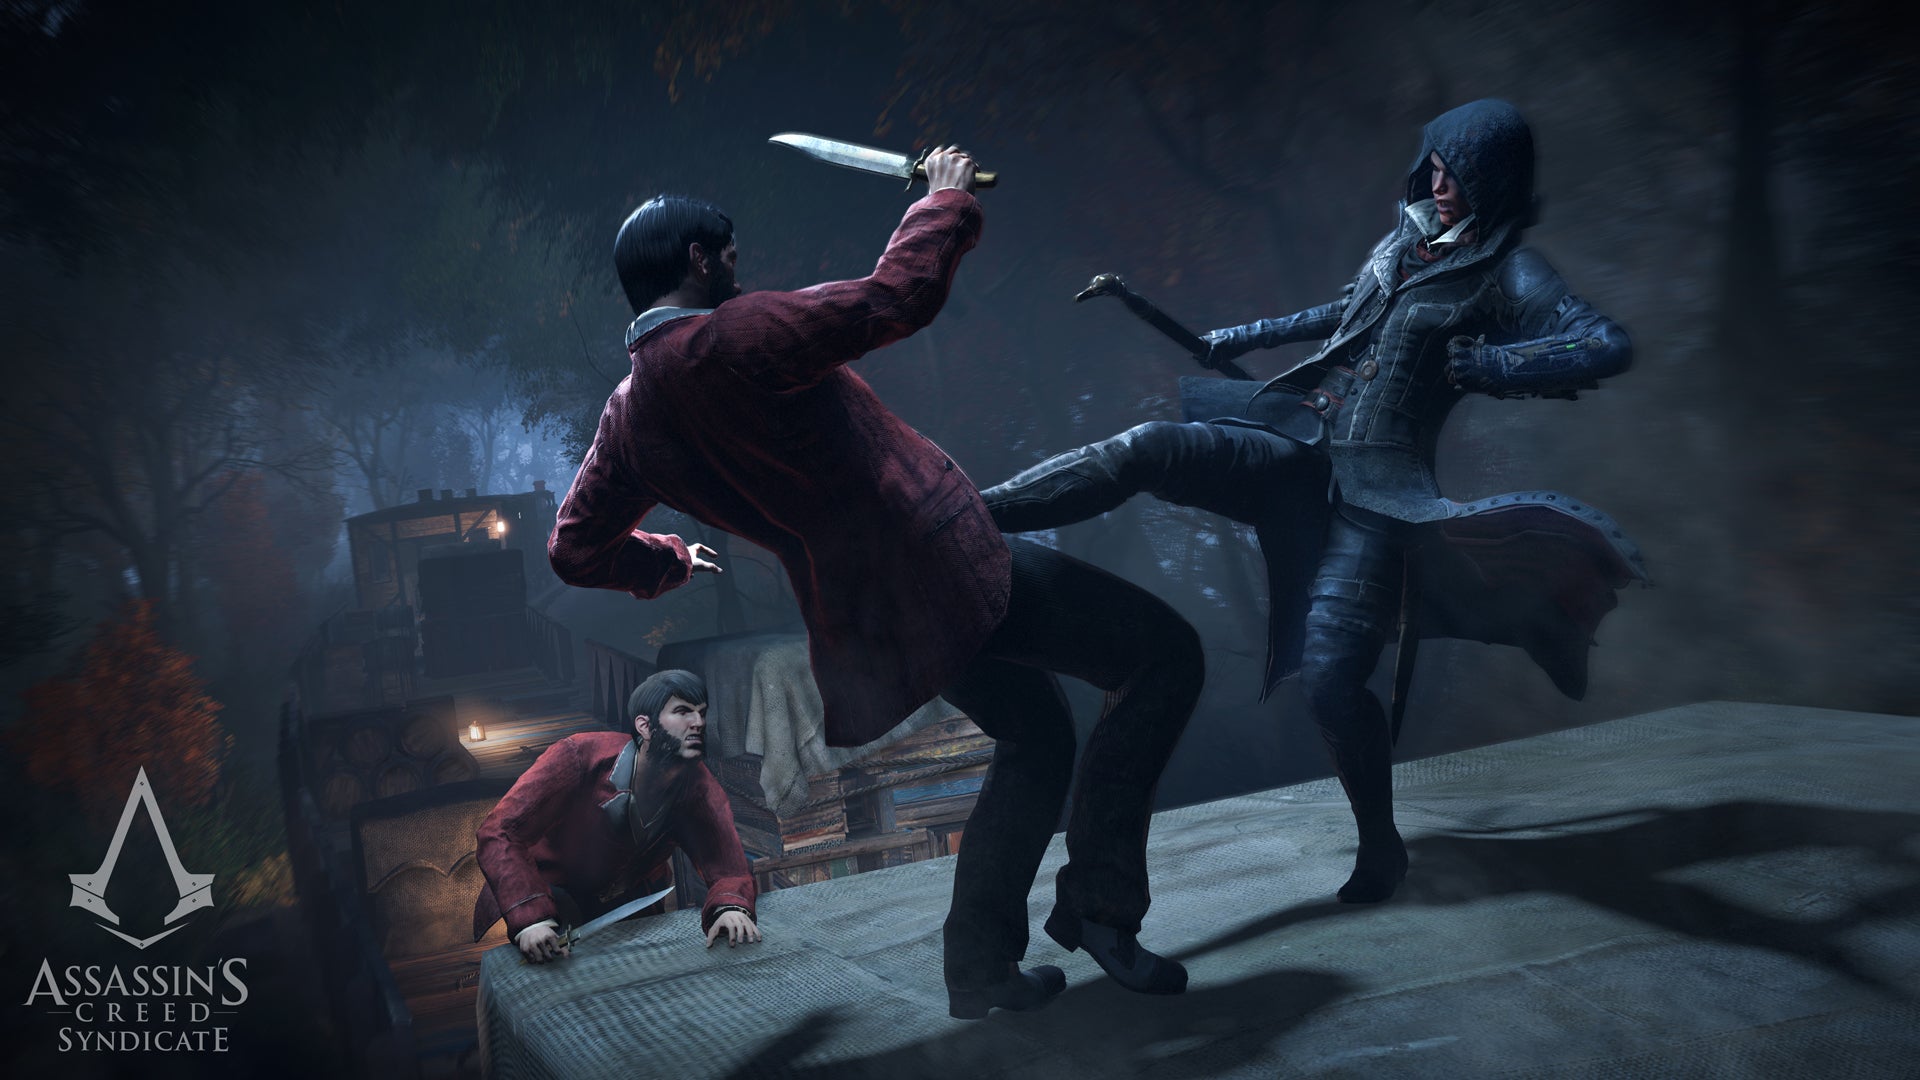 Image for Ridiculous Assassin's Creed Syndicate kill points to violent hilarity